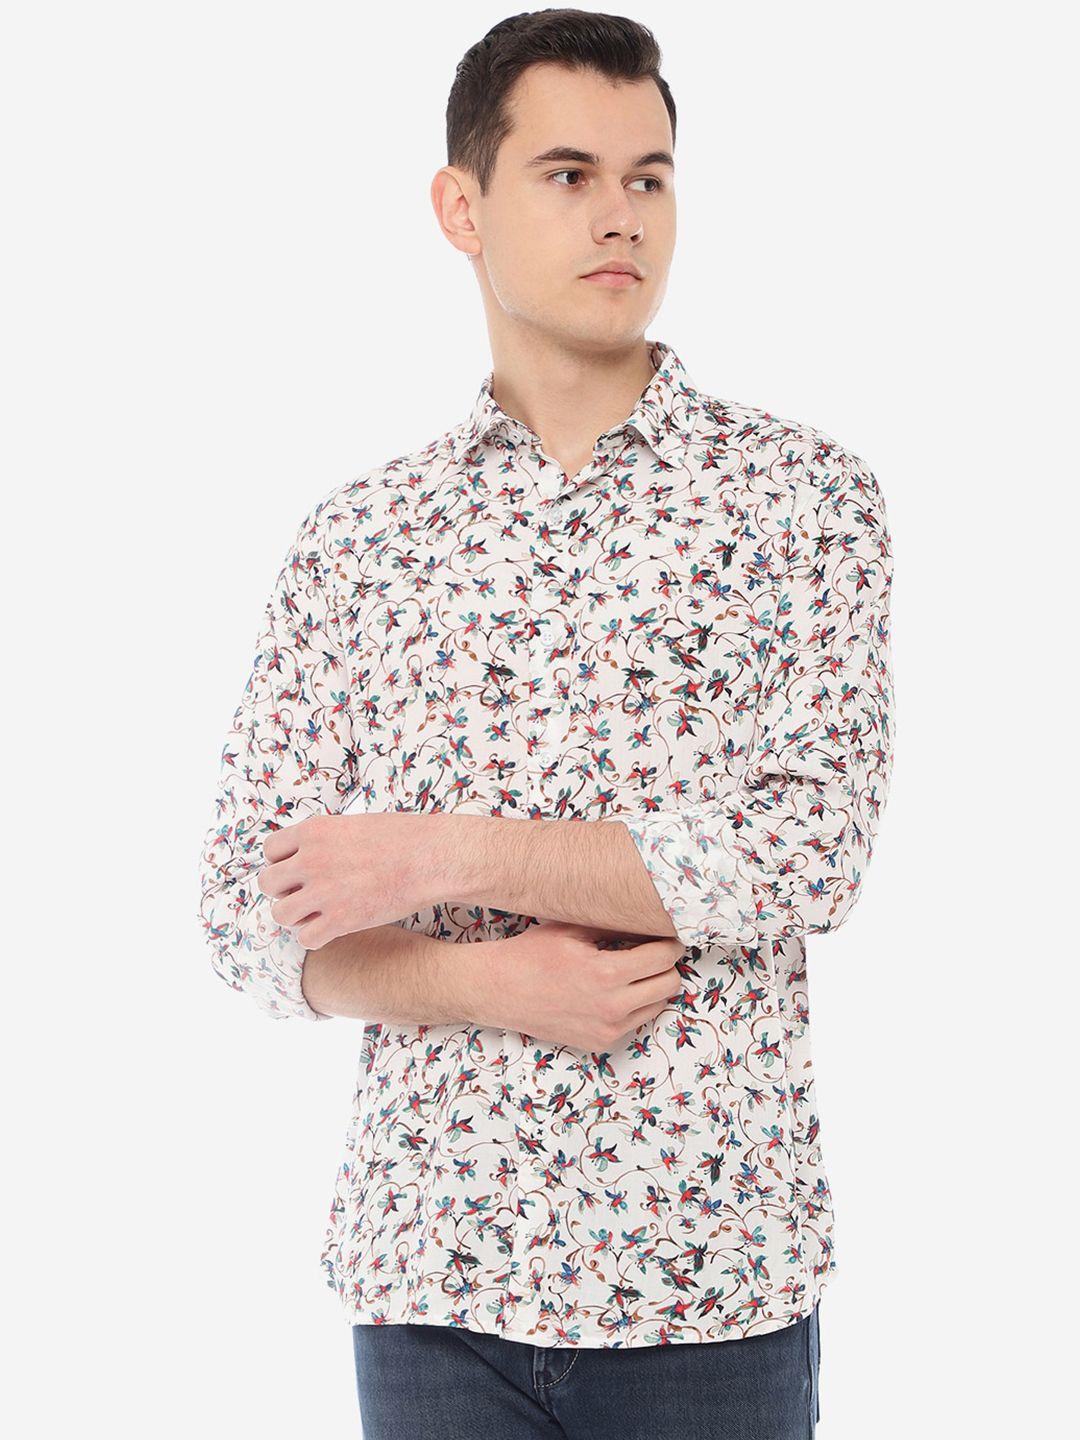 jade-blue-slim-fit-floral-printed-cotton-casual-shirt